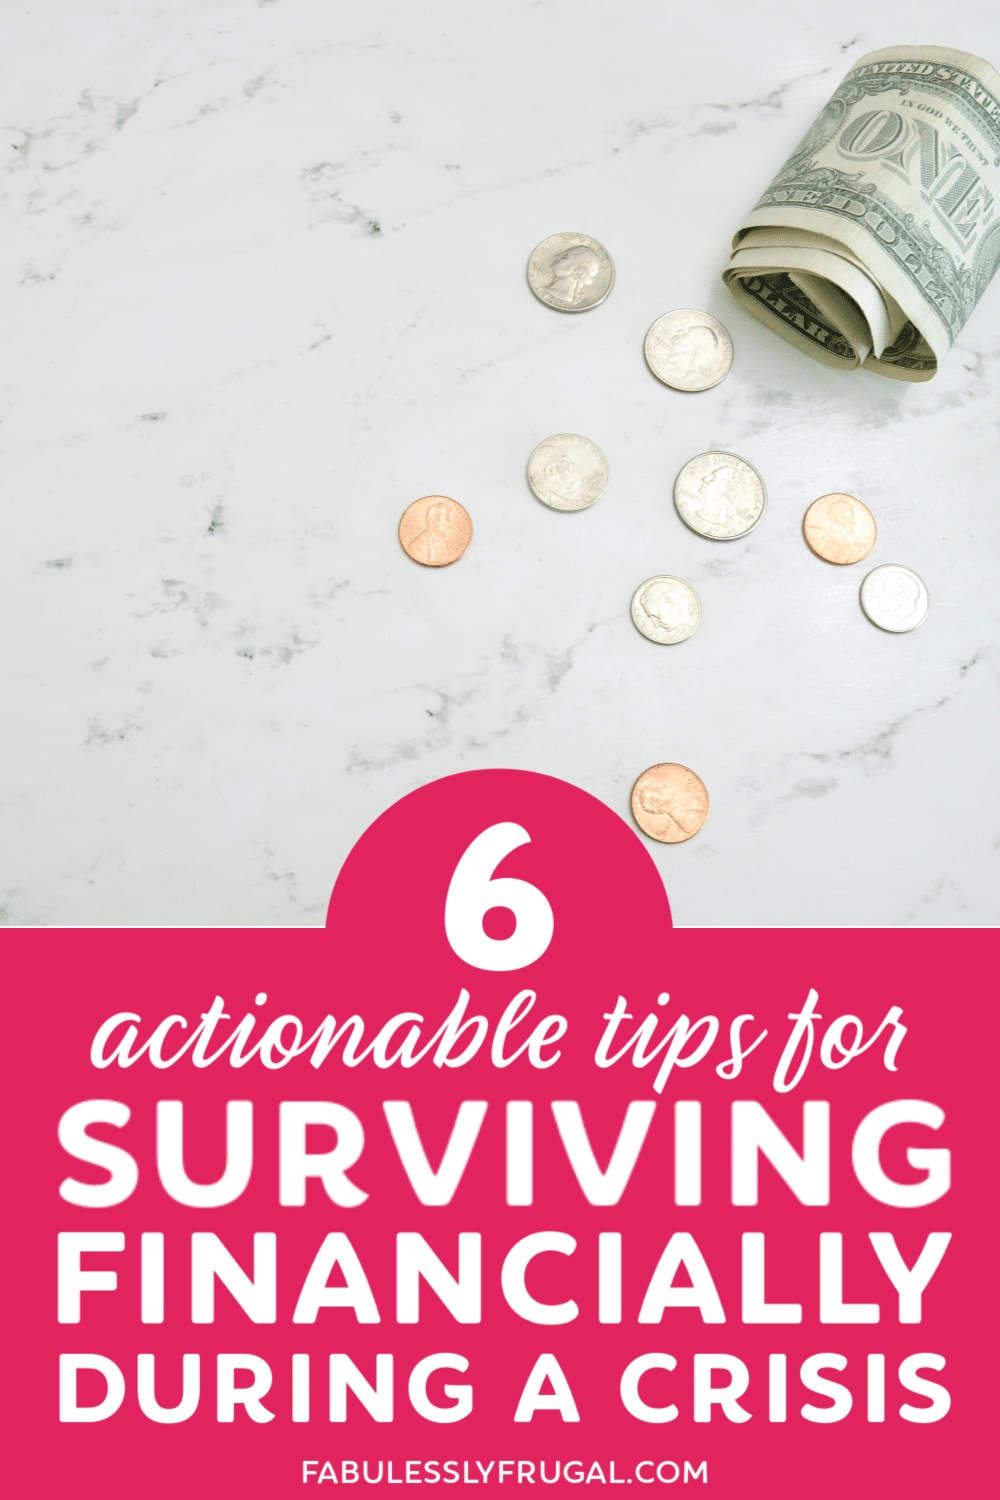 How to financially survive a crisis